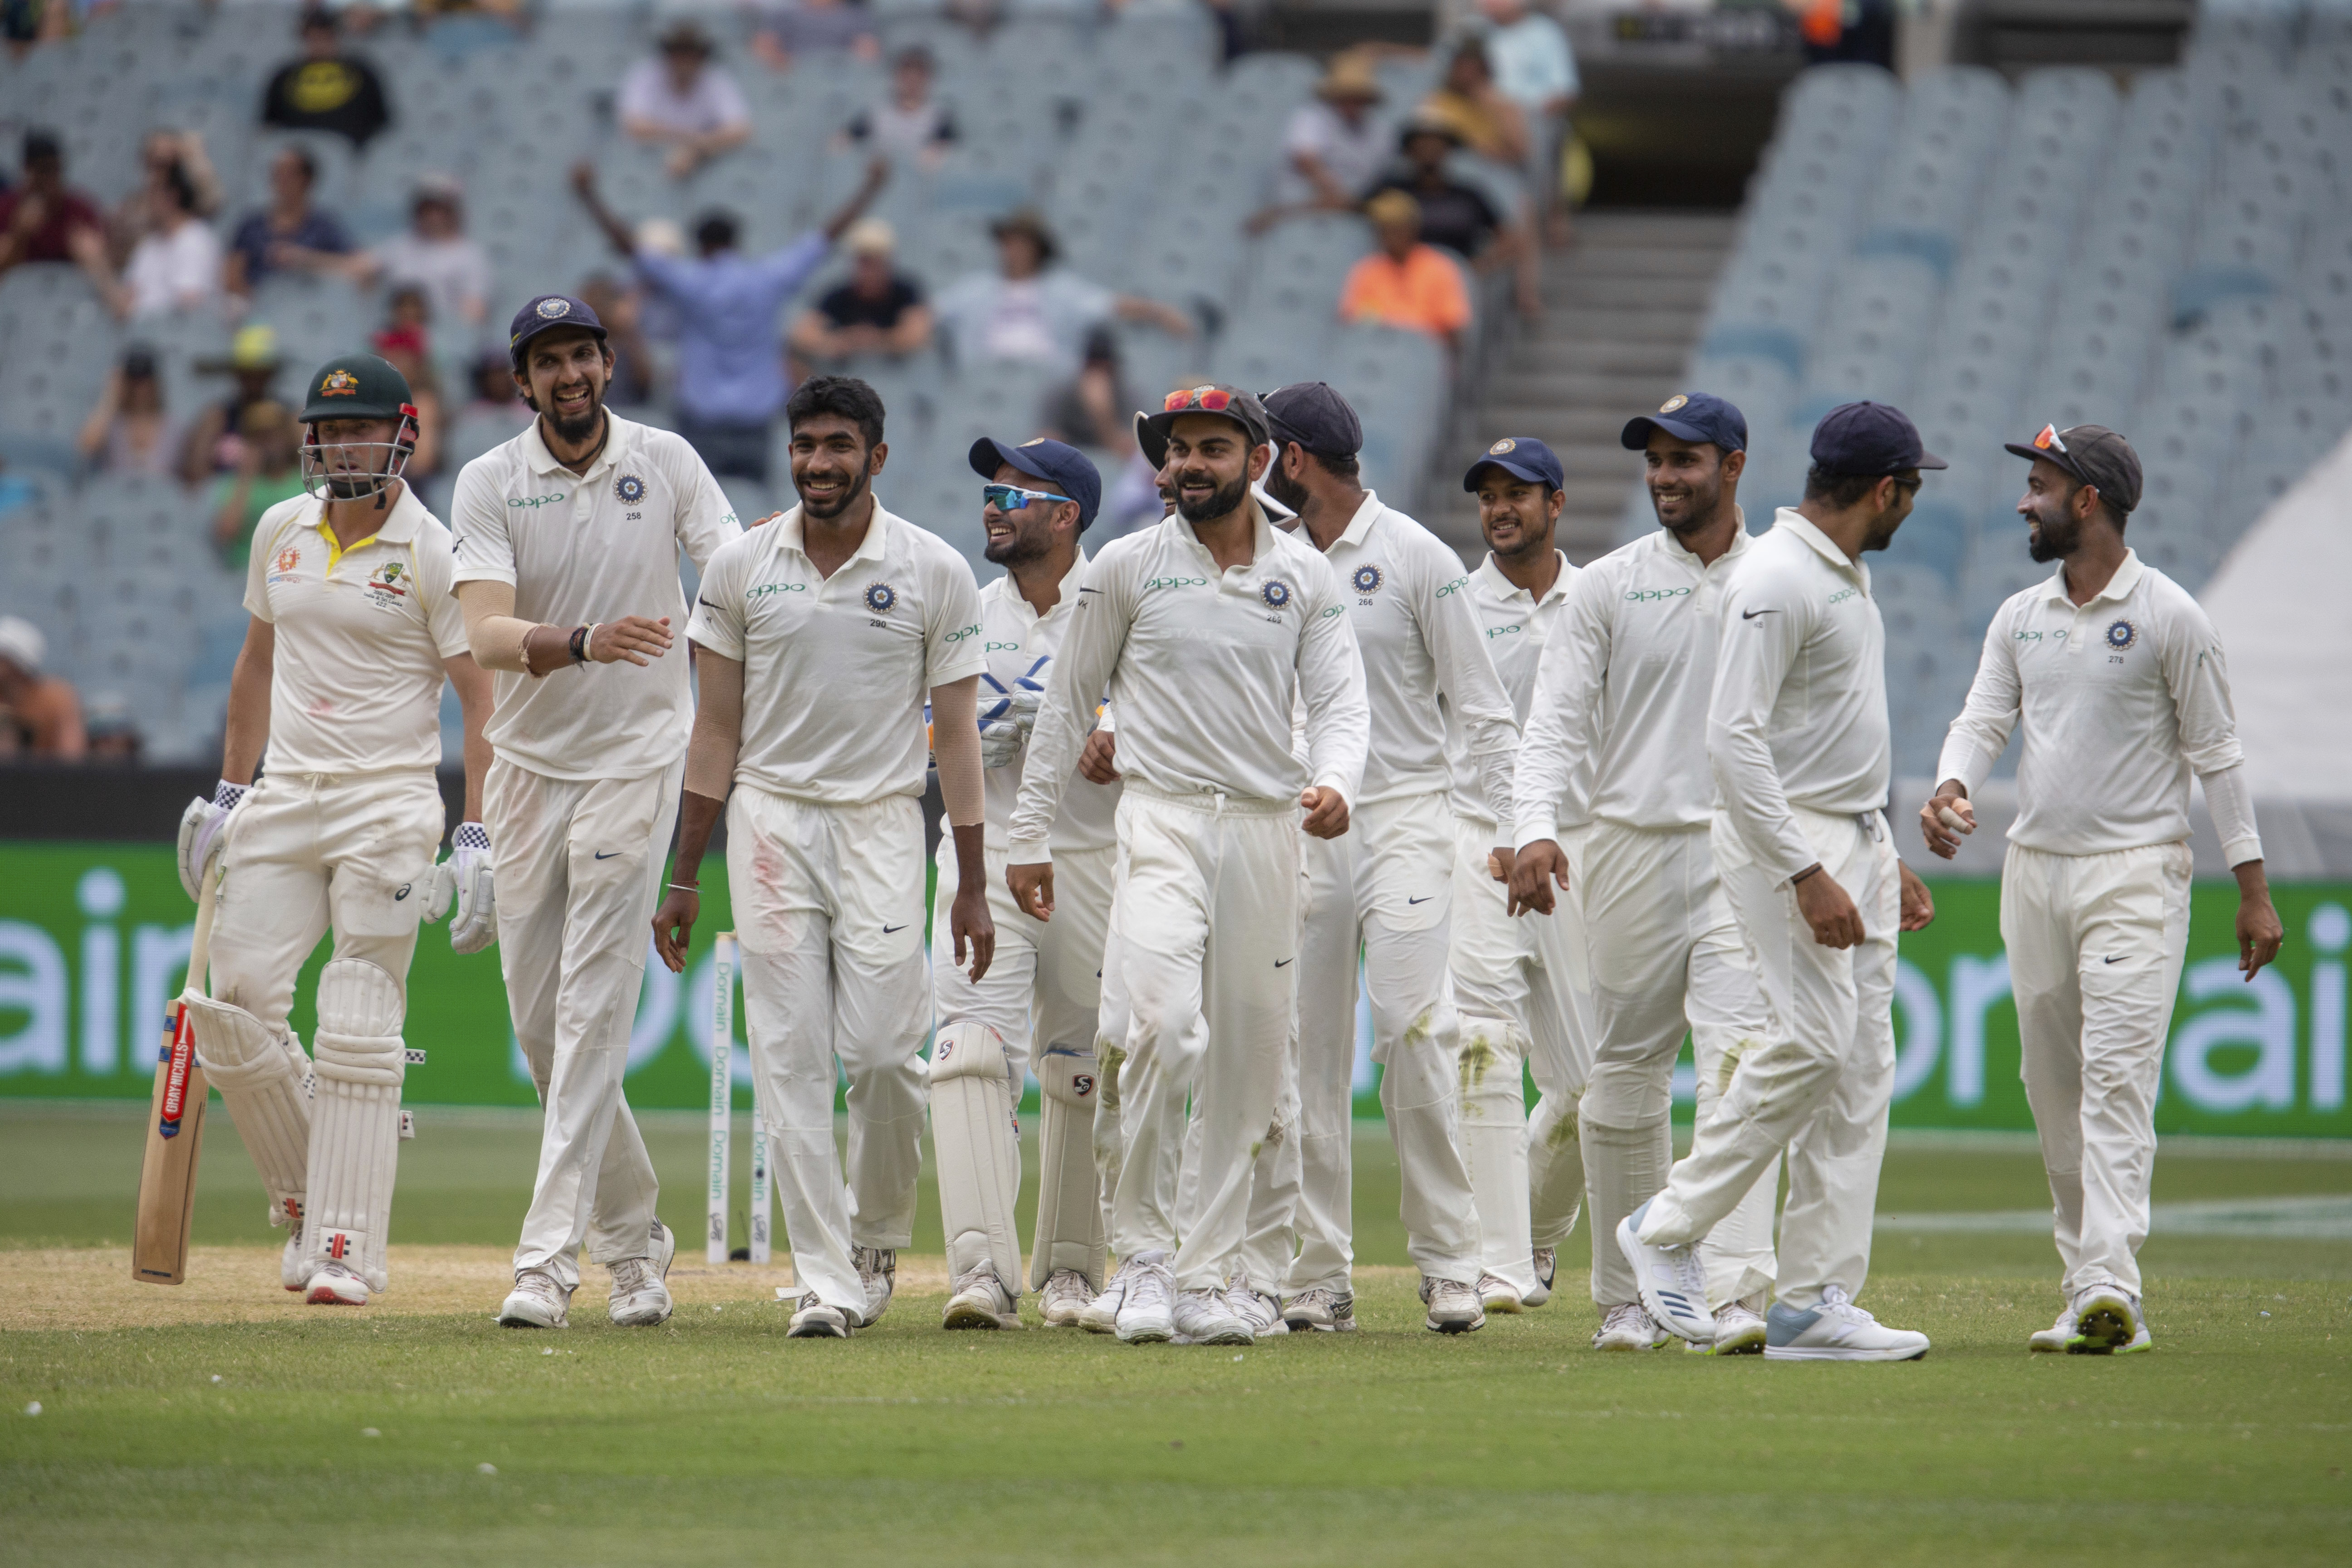 Indian team members walk off the field for lunch, led by captain Virat Kohli, centre, on day three of the third cricket test between India and Australia in Melbourne on Friday, December 28, 2018